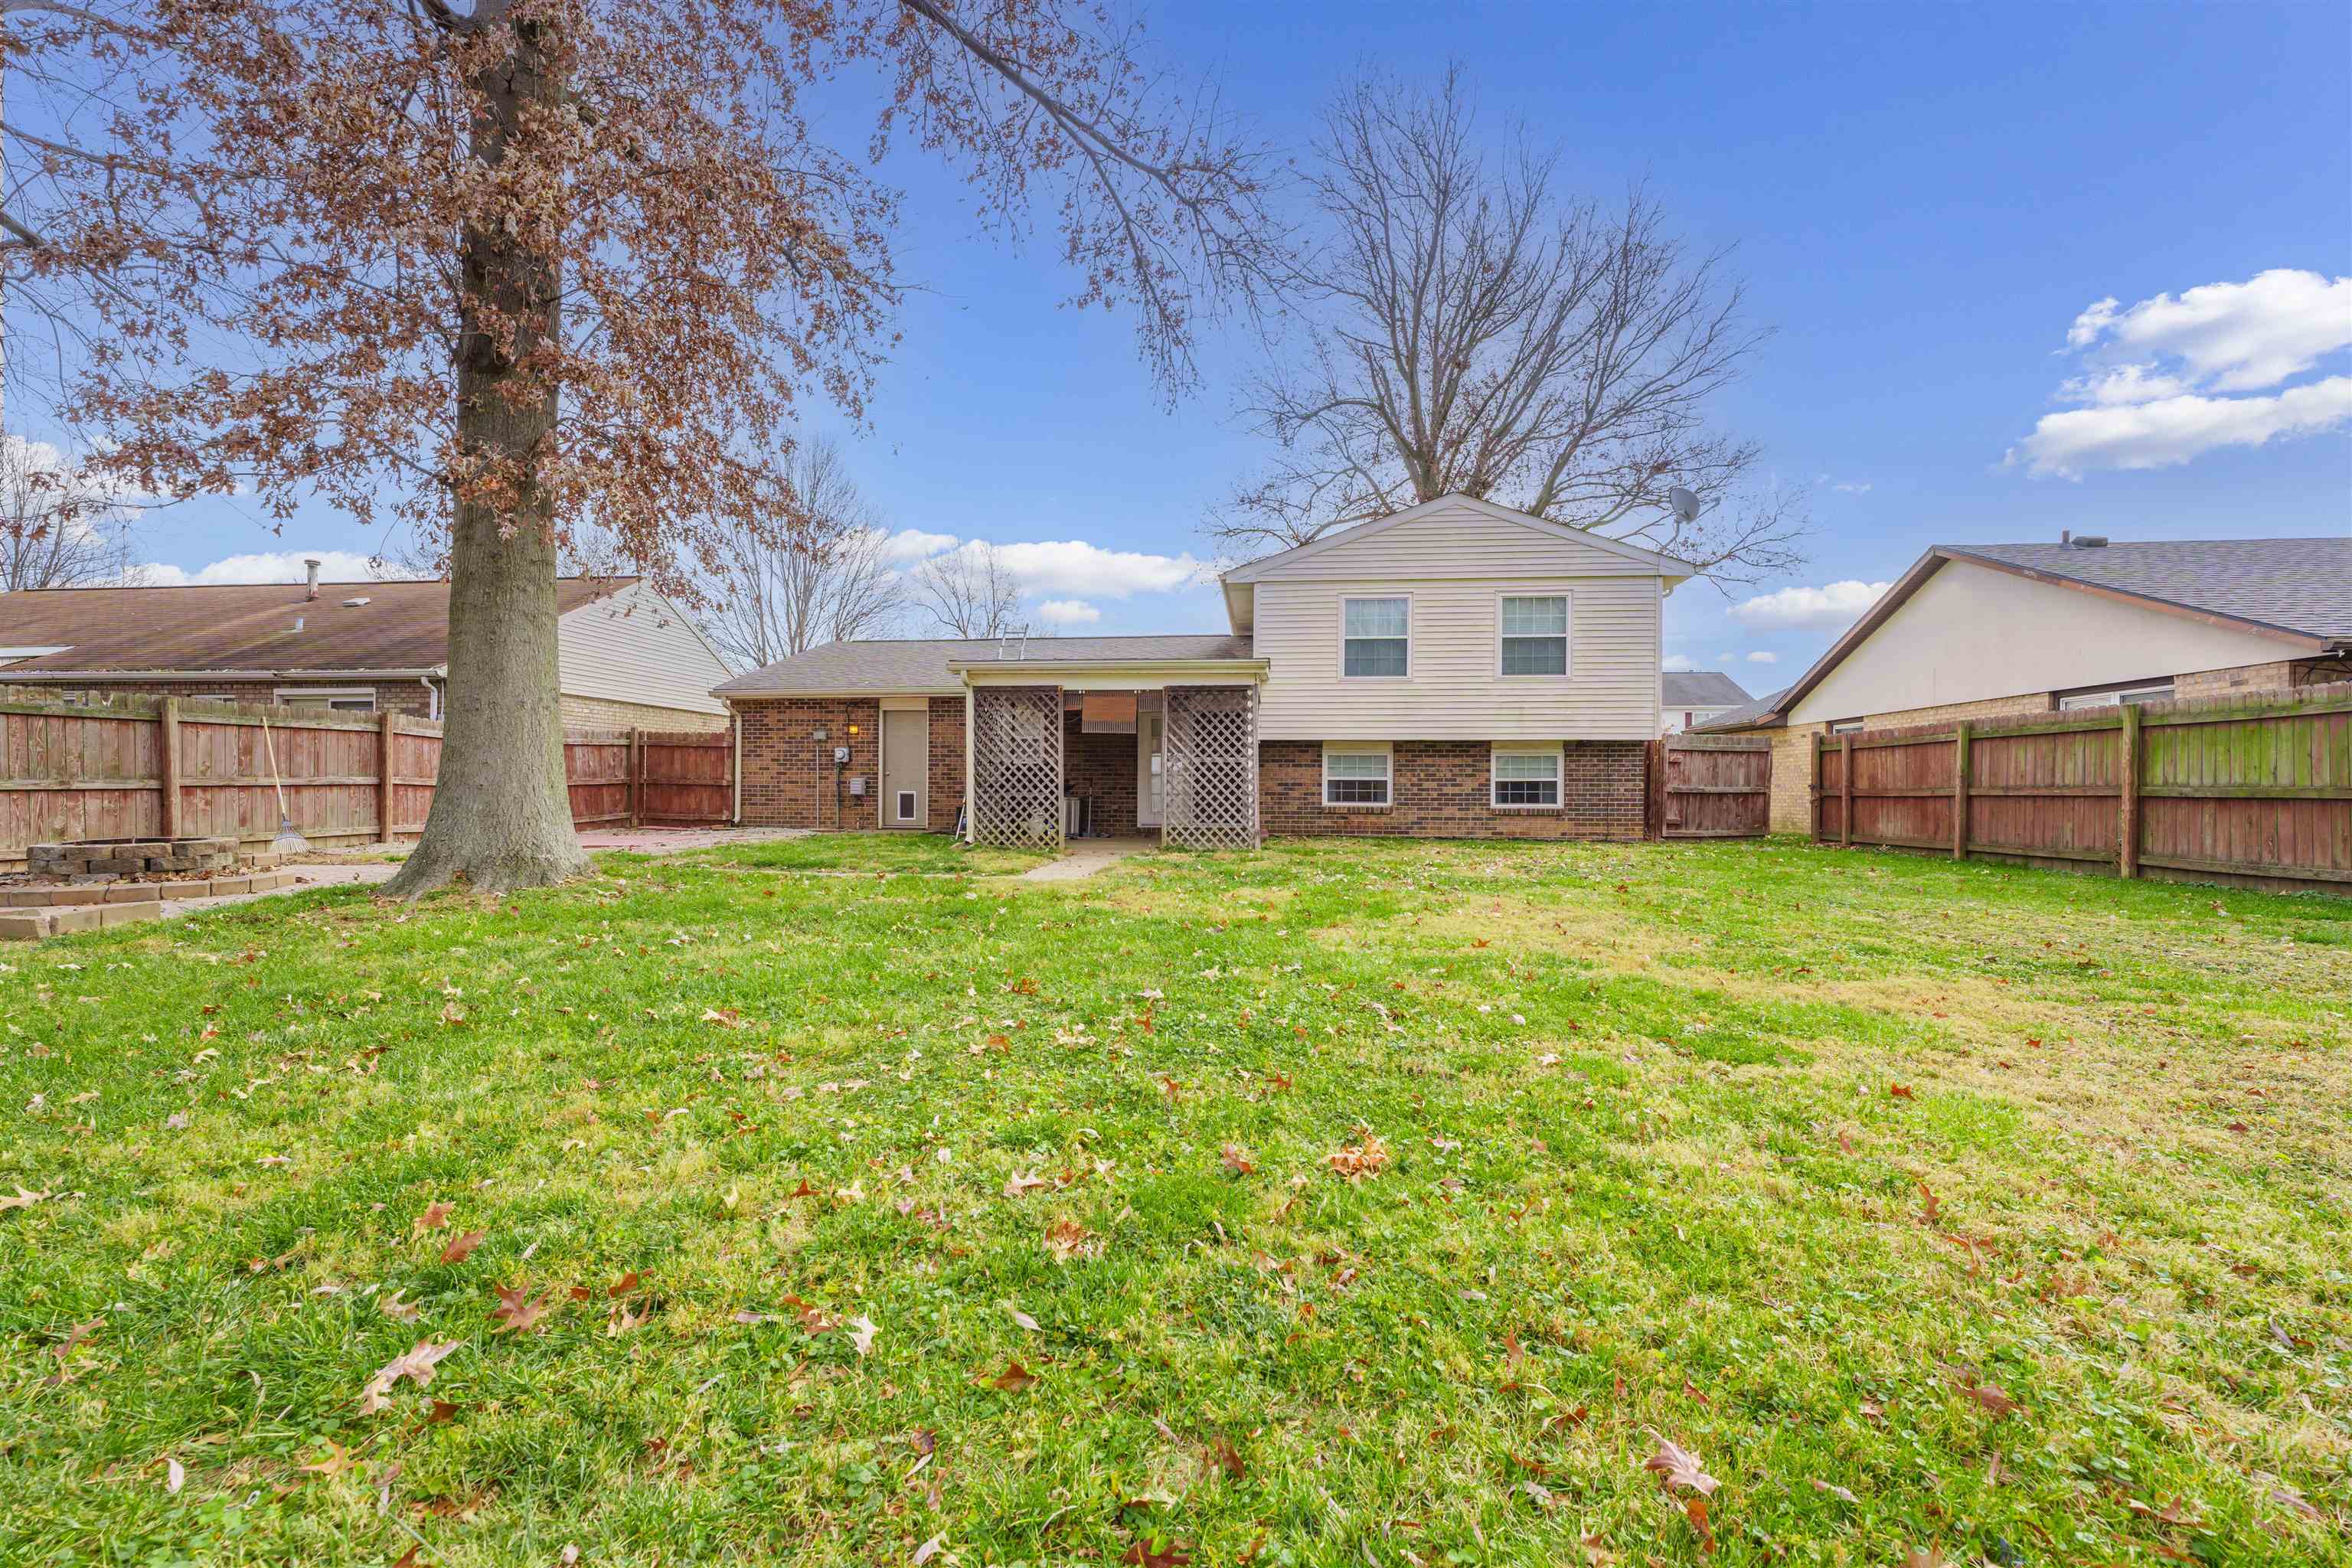 4006 Fogle Dr, Owensboro, Kentucky 42301, 3 Bedrooms Bedrooms, ,1 BathroomBathrooms,Single Family Residence,For Sale,Fogle Dr,88672